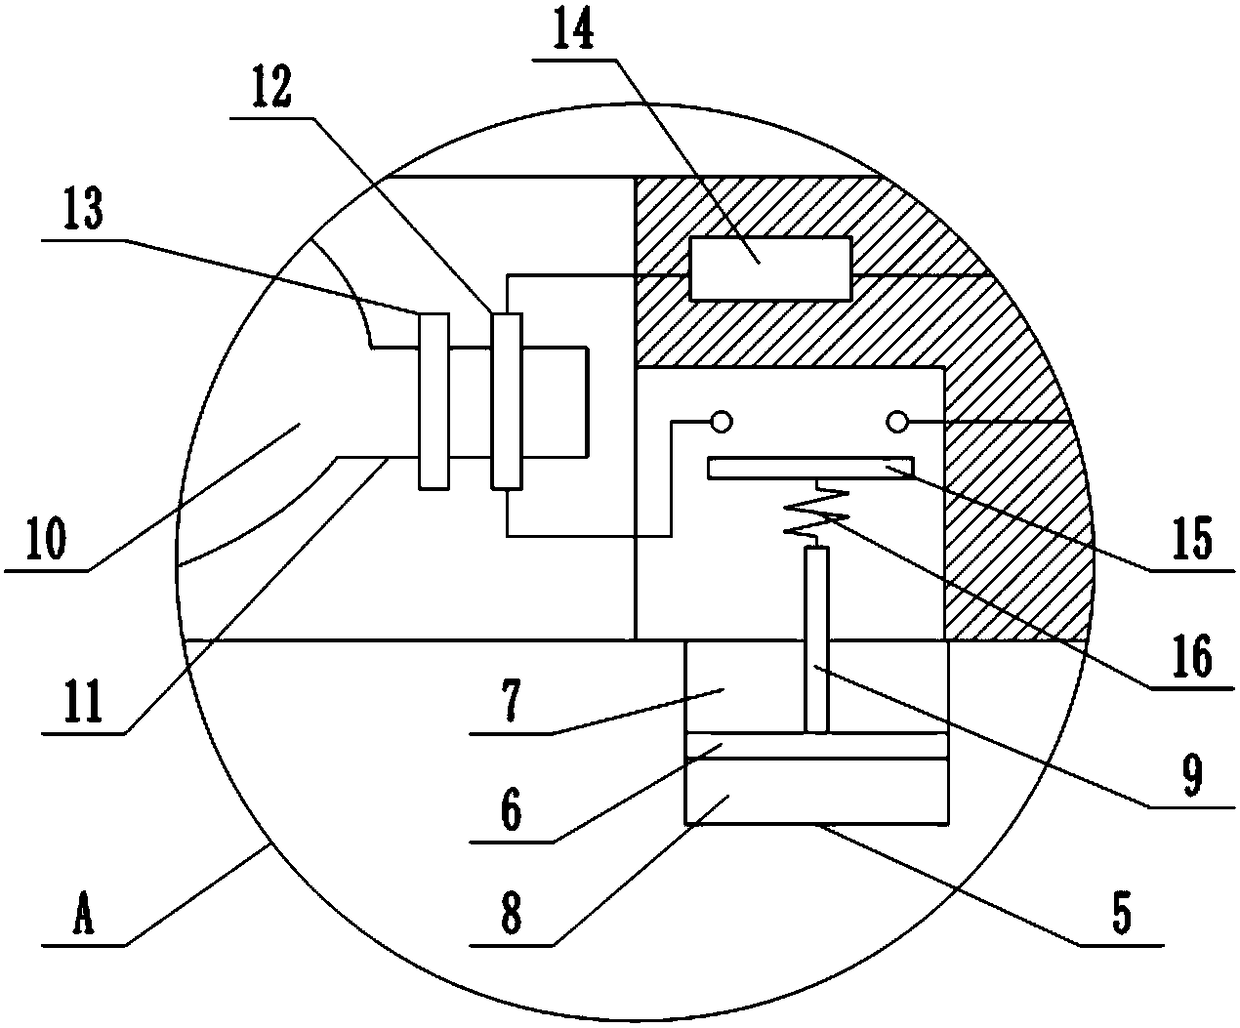 Storage device for electro-mechanical products